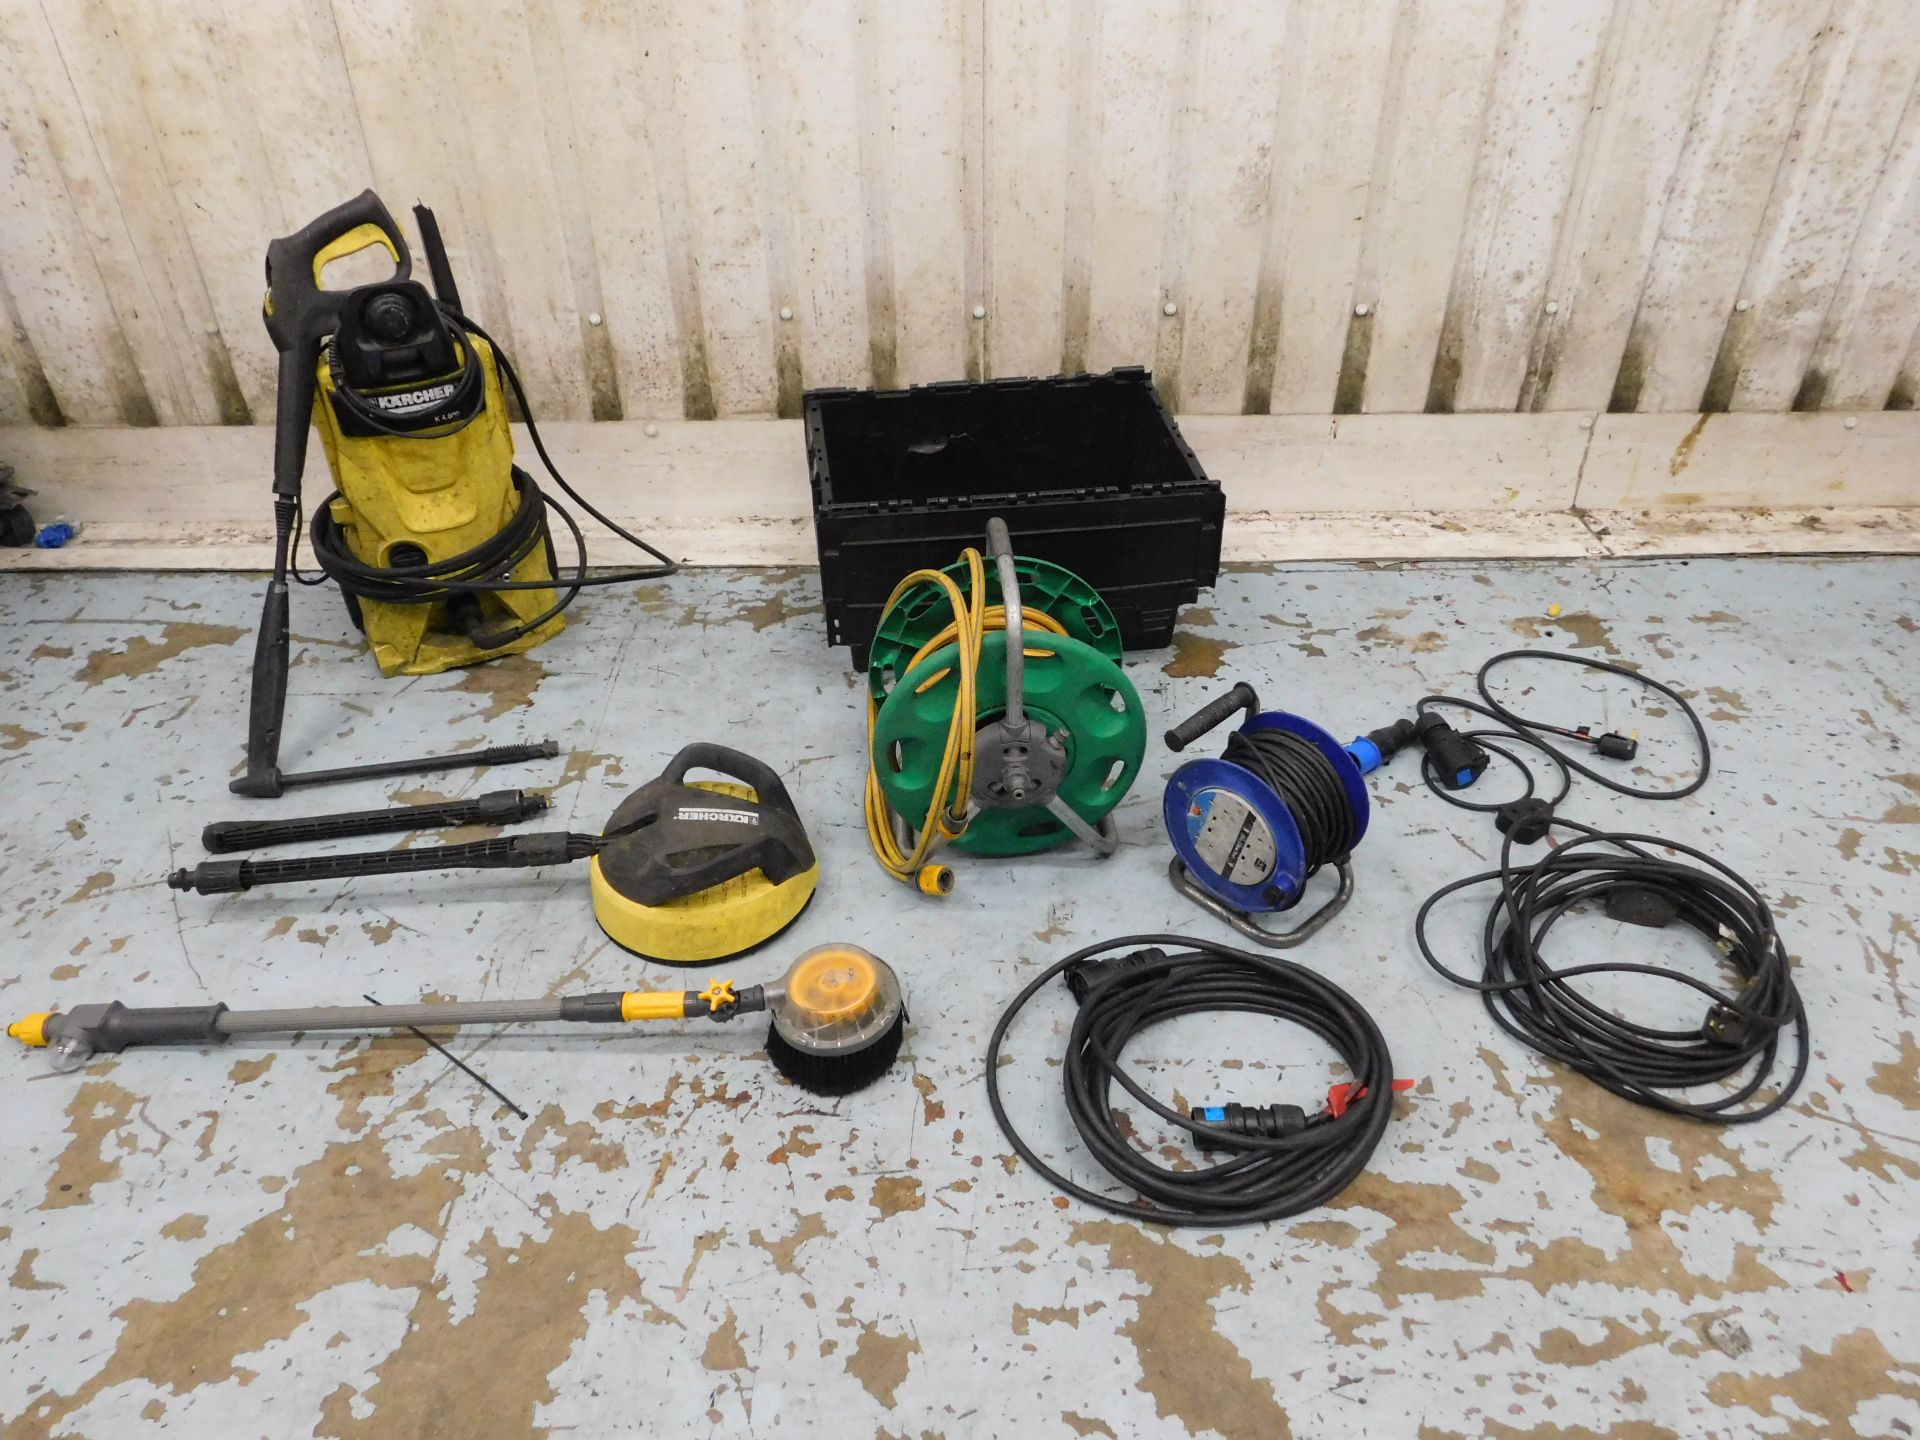 Karcher Pressure Washer, Crate, Hose, Extension Lead etc. (Location: South East London. Please Refer